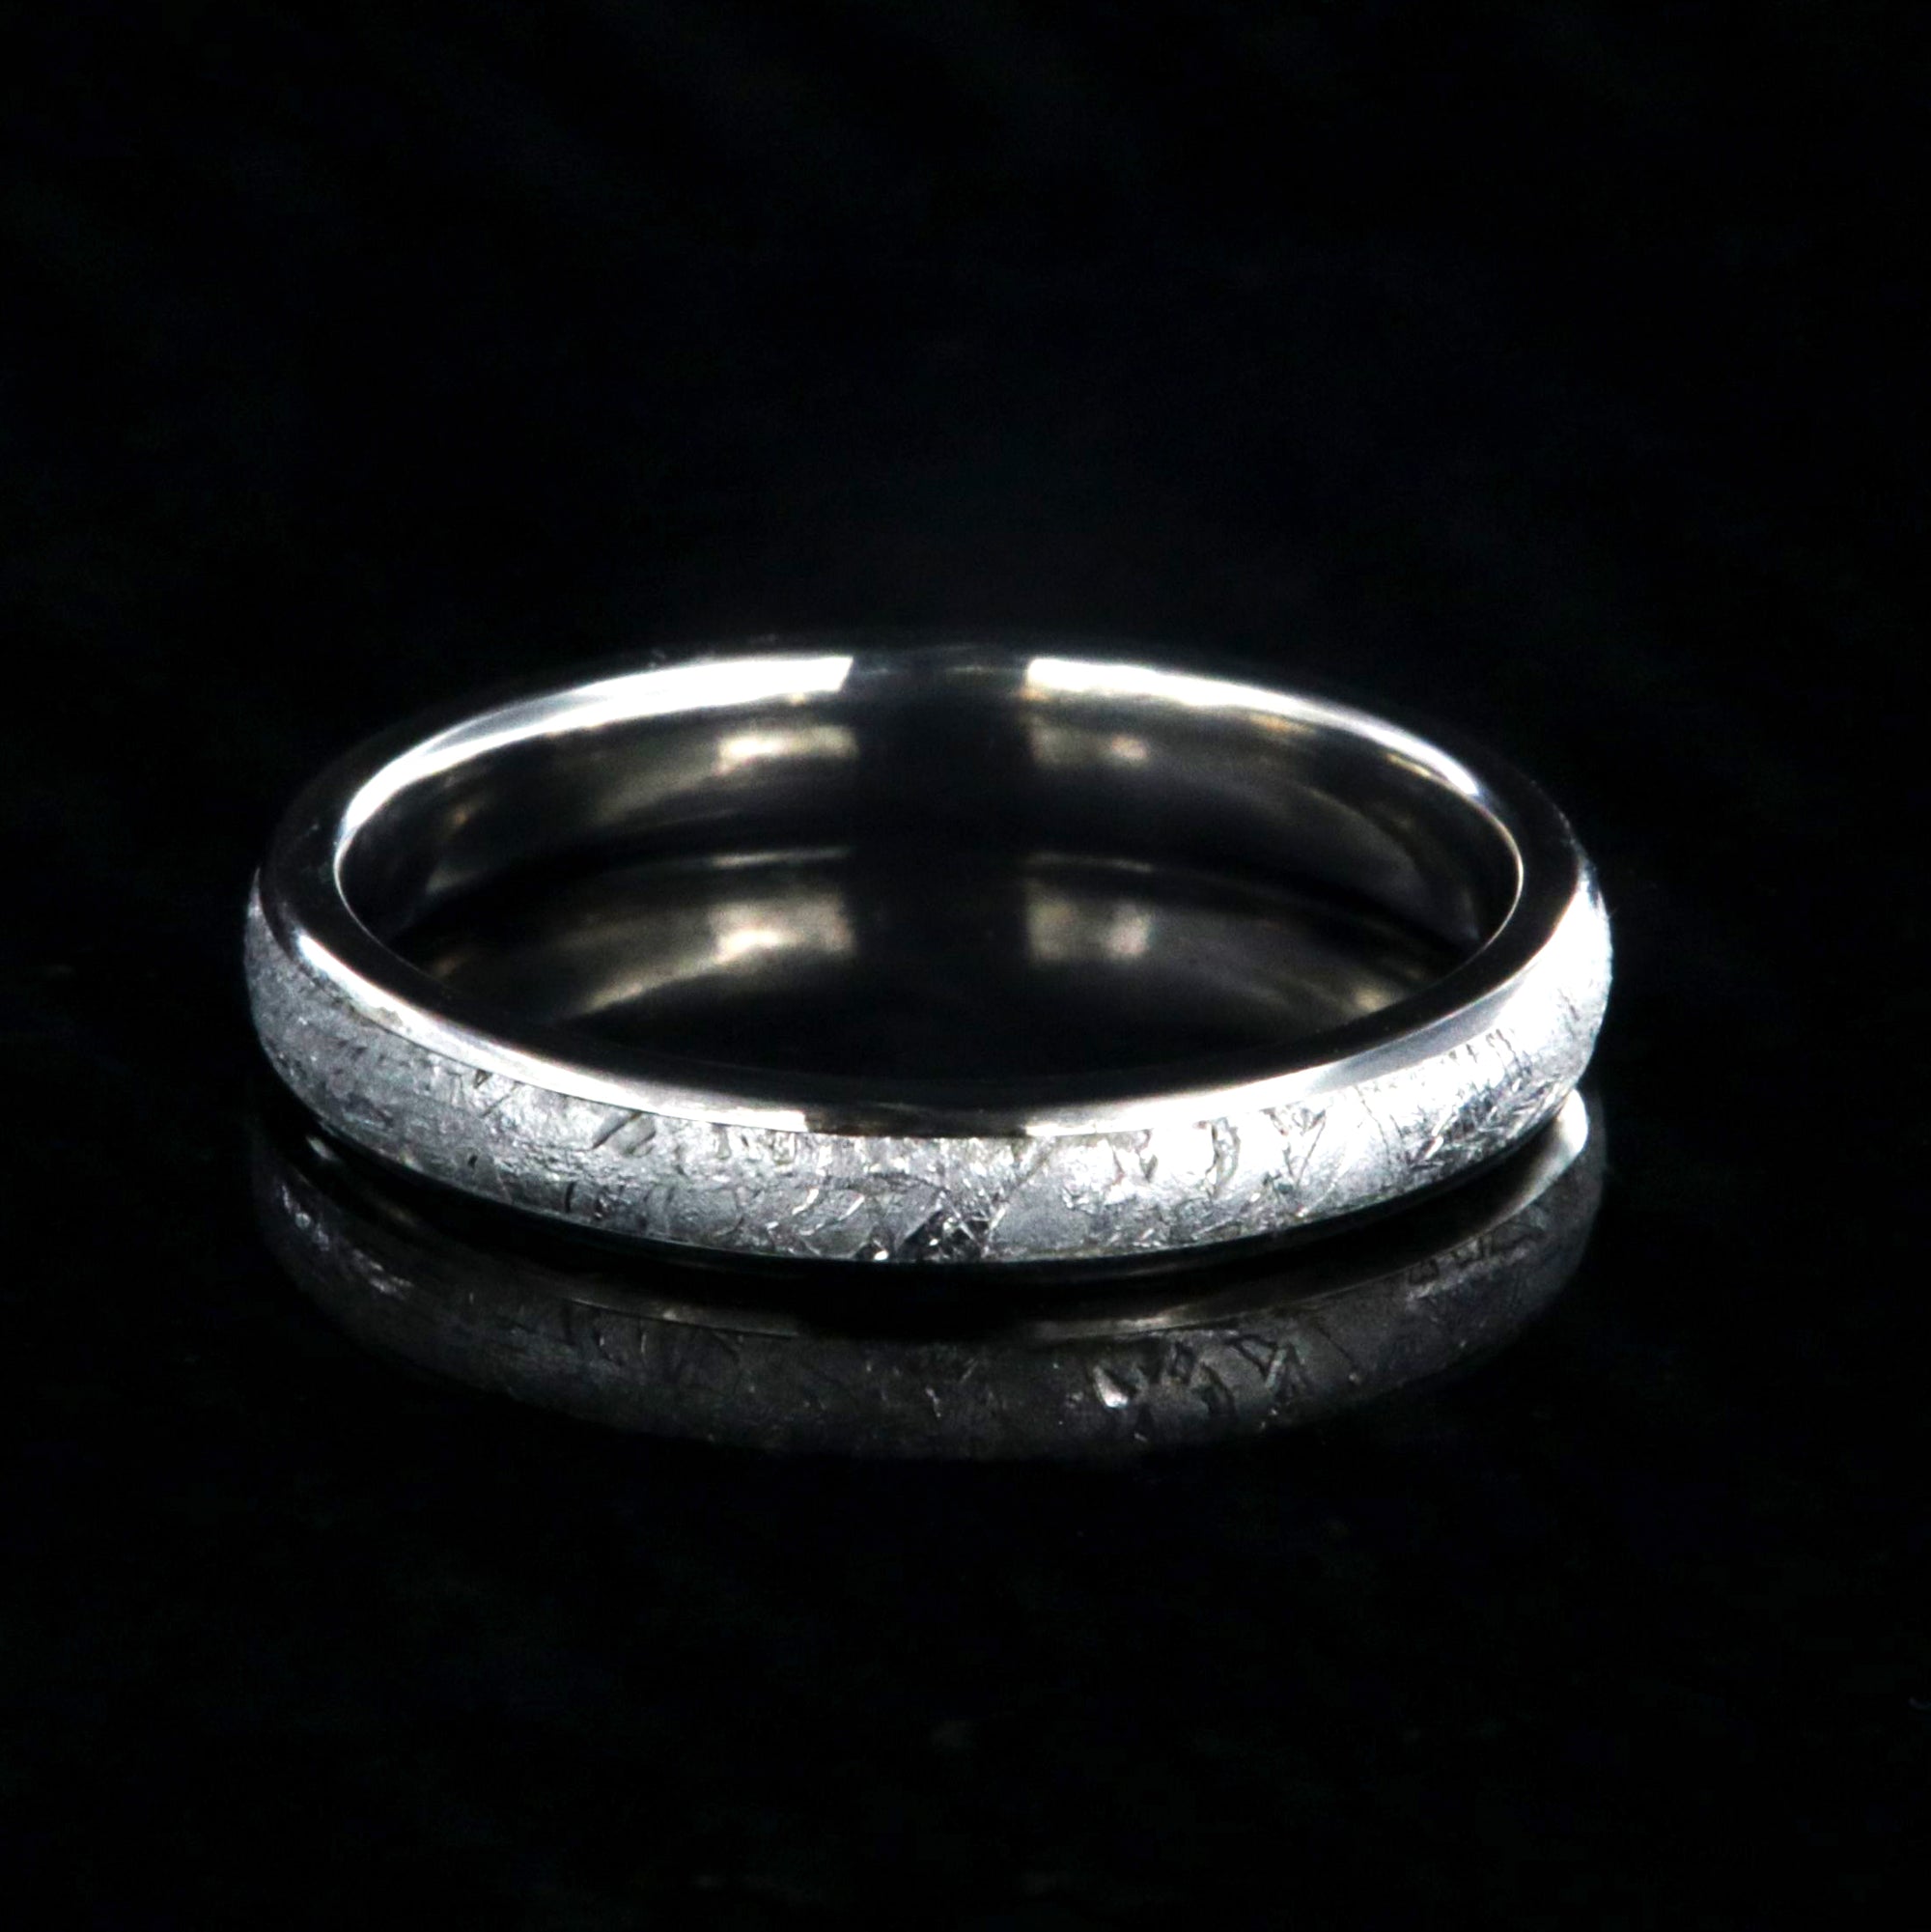 3mm wide Gibeon meteorite wedding band for women with titanium edges and sleeve